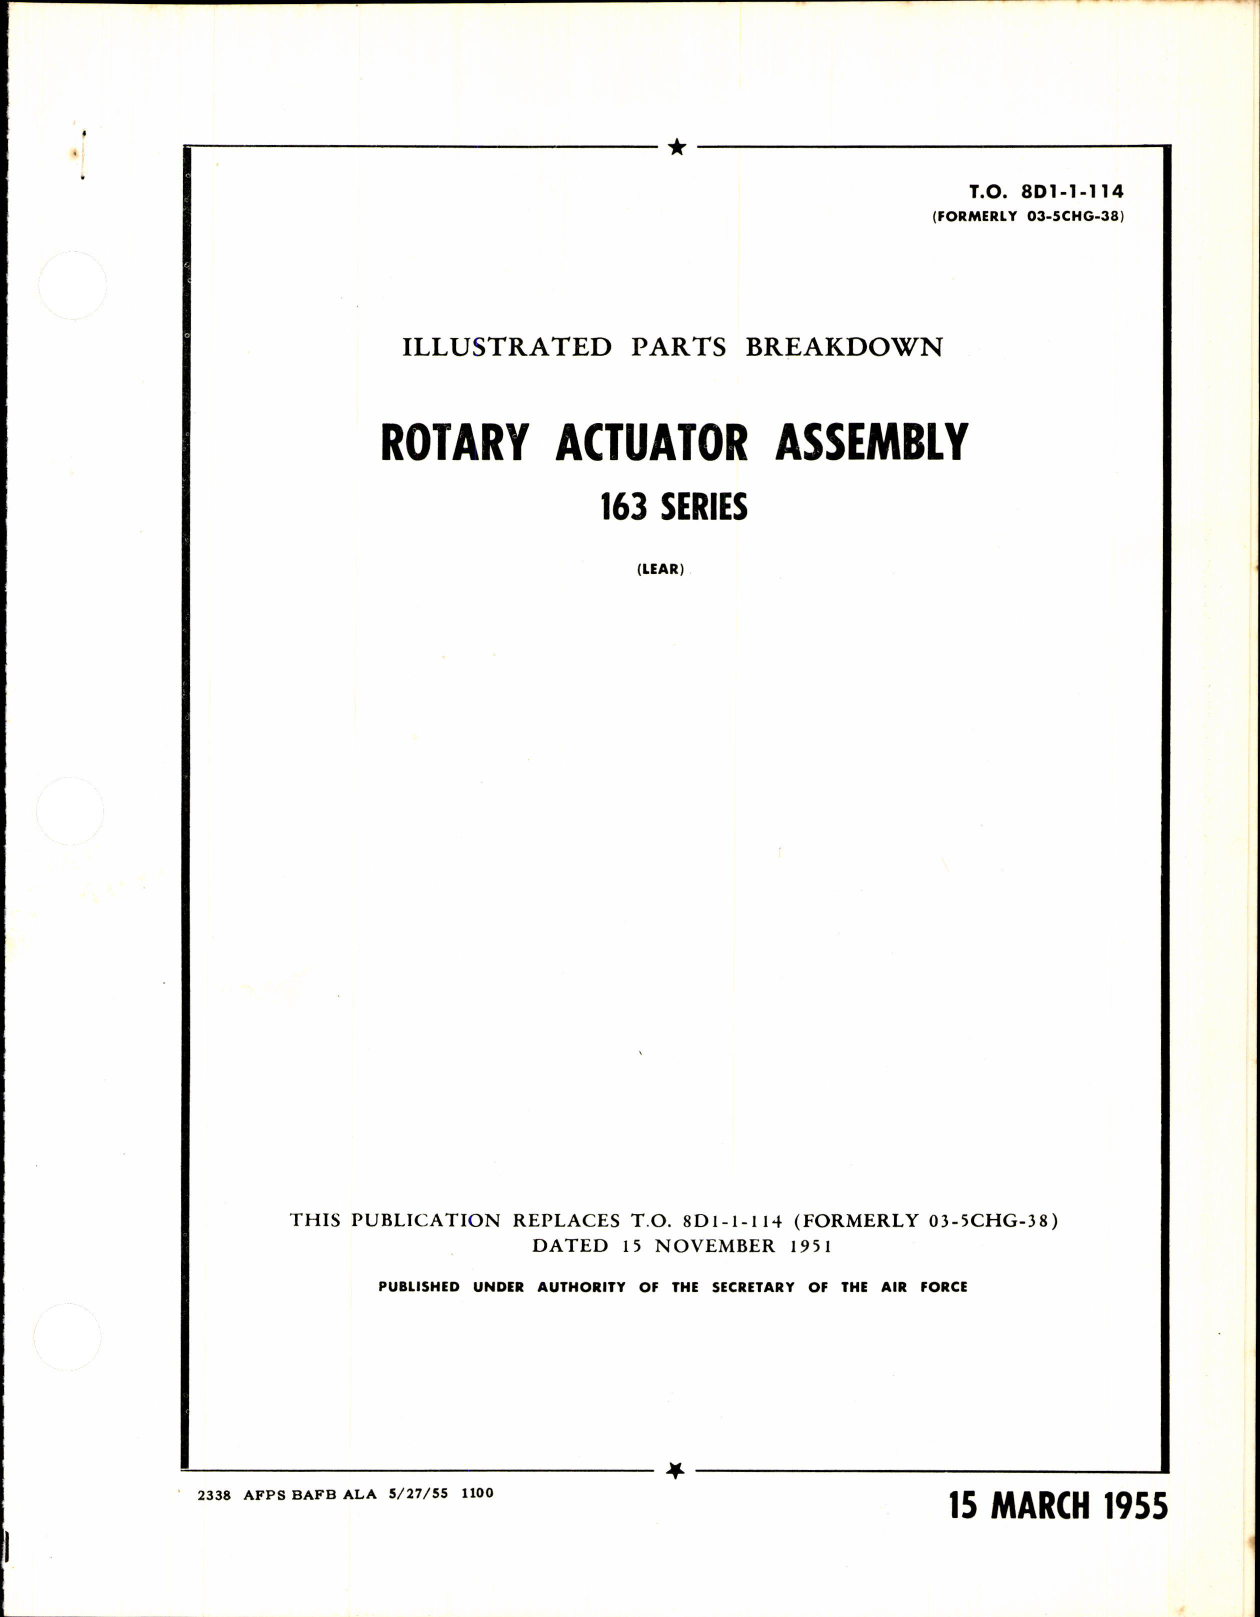 Sample page 1 from AirCorps Library document: Parts Breakdown Rotary Actuator Assembly 163 Series